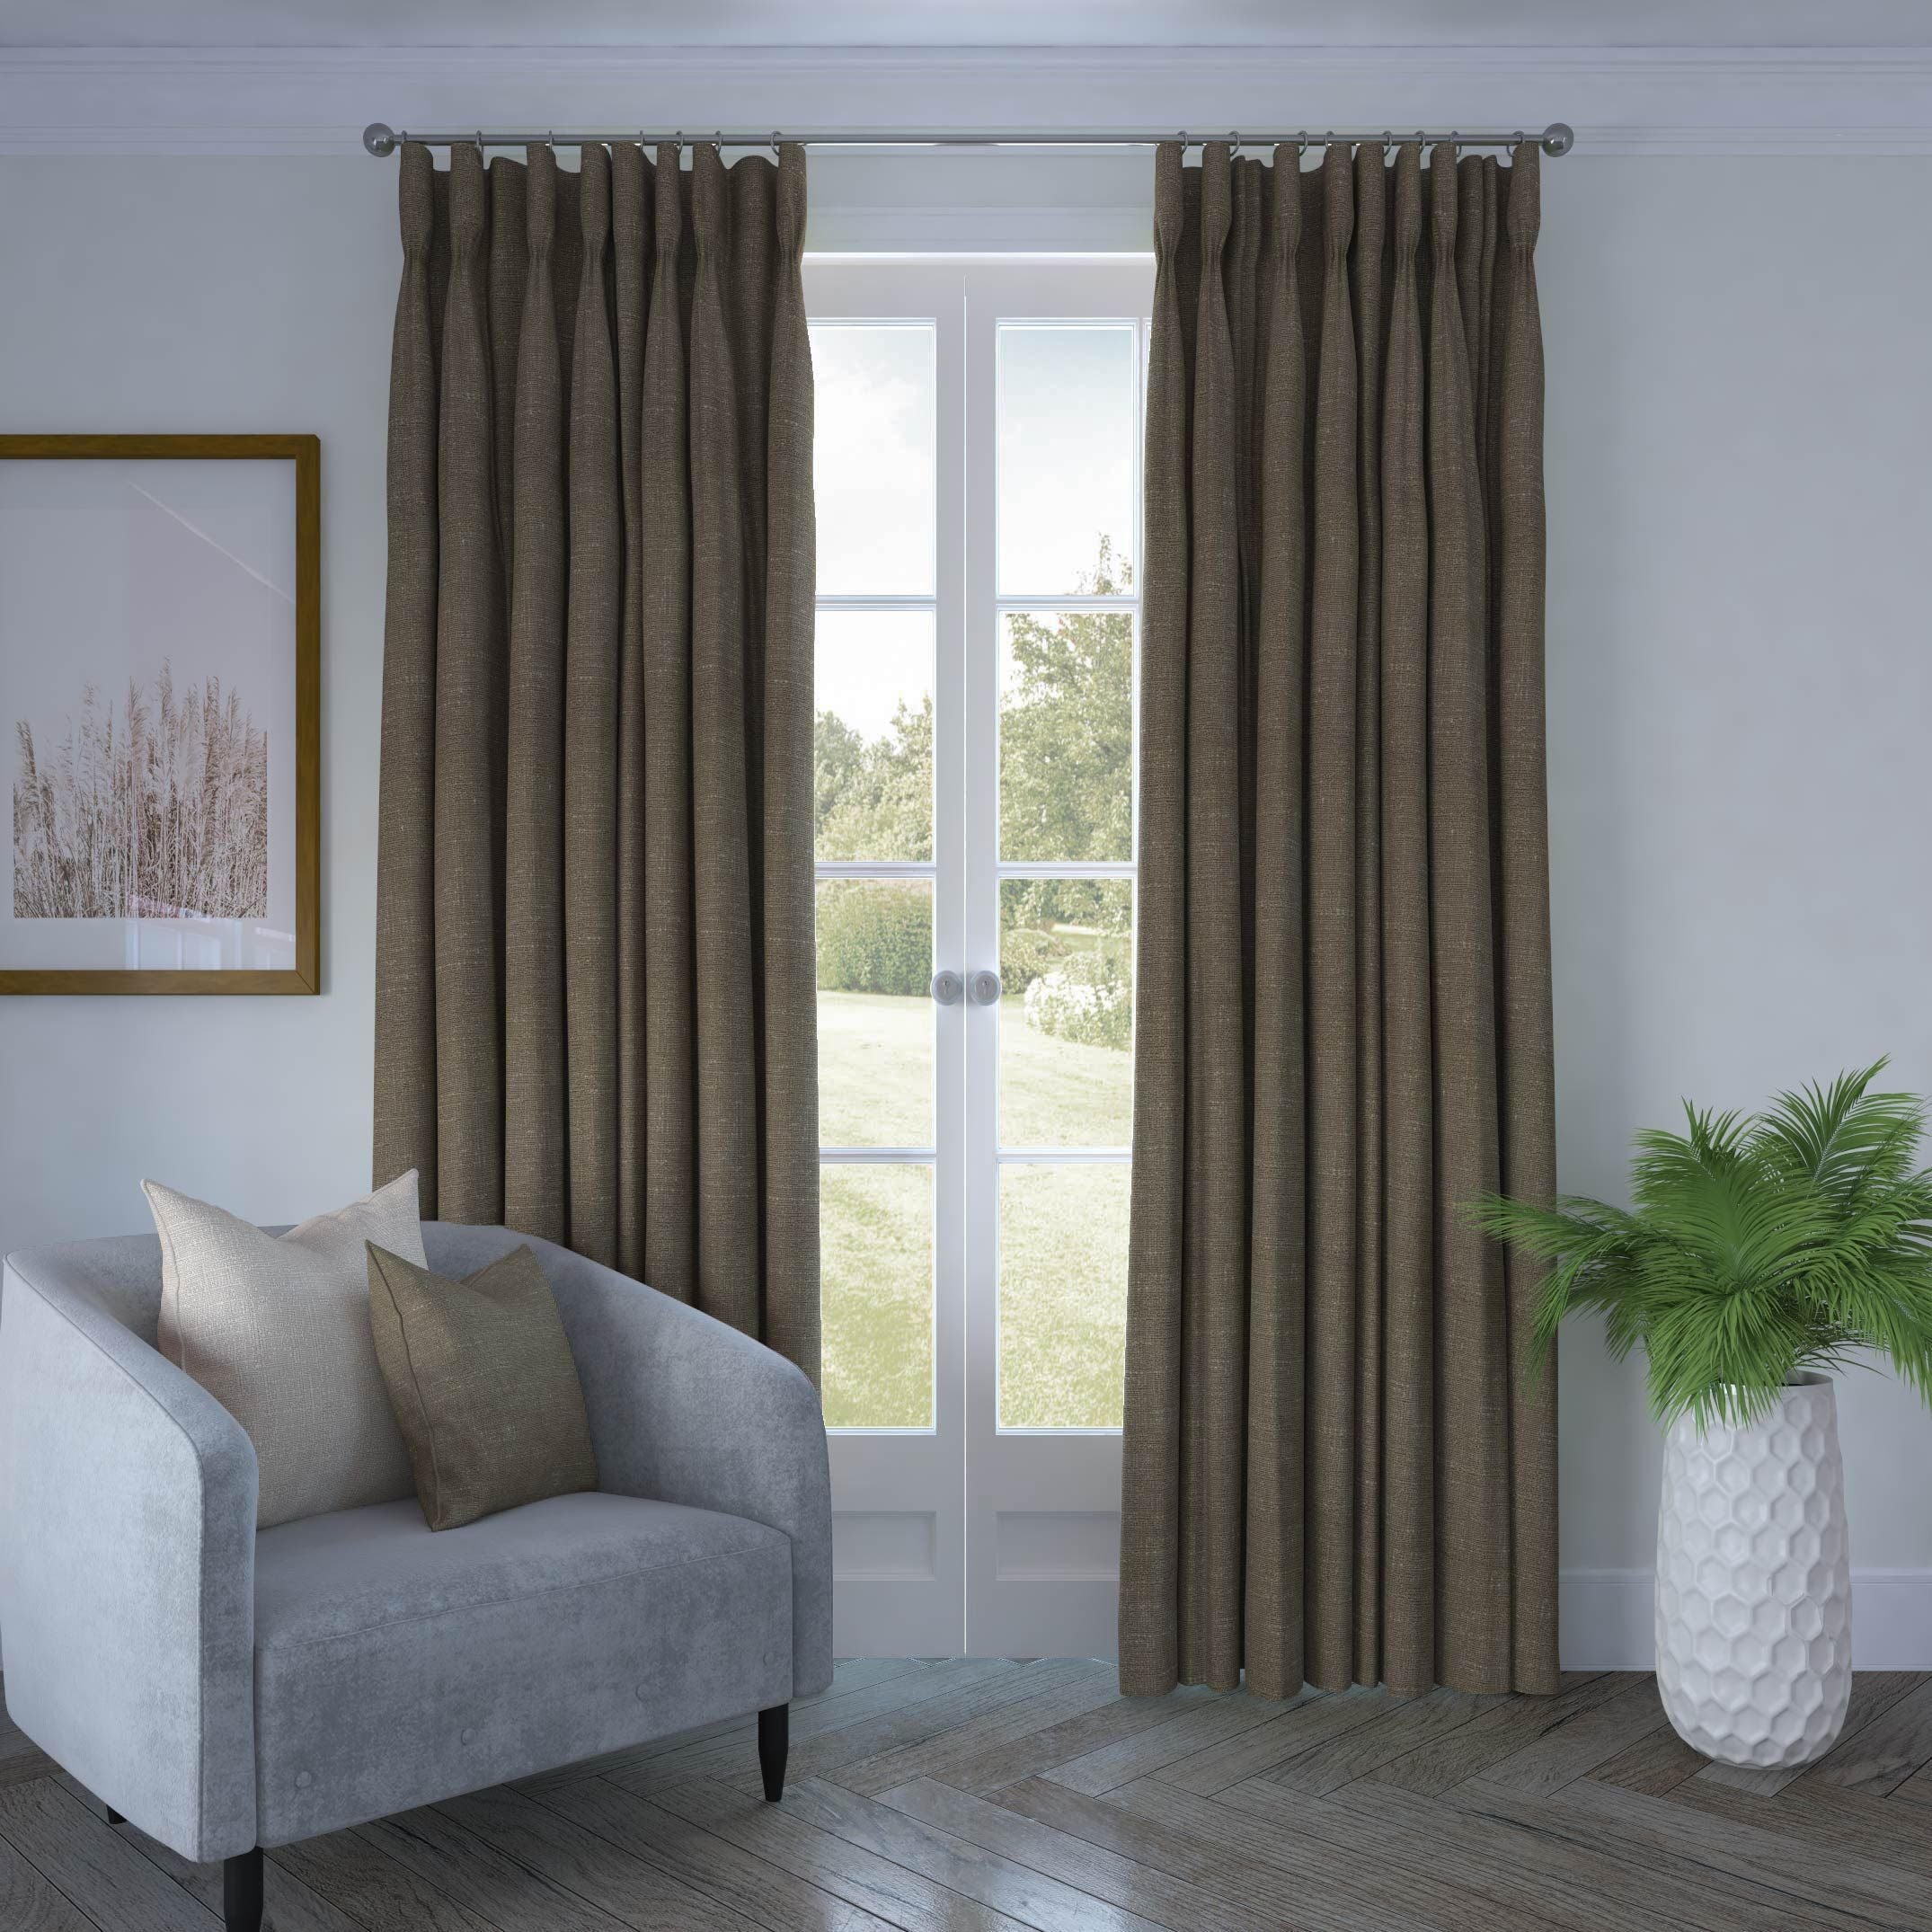 McAlister Textiles Harmony Linen Blend Mocha Textured Curtains Tailored Curtains 